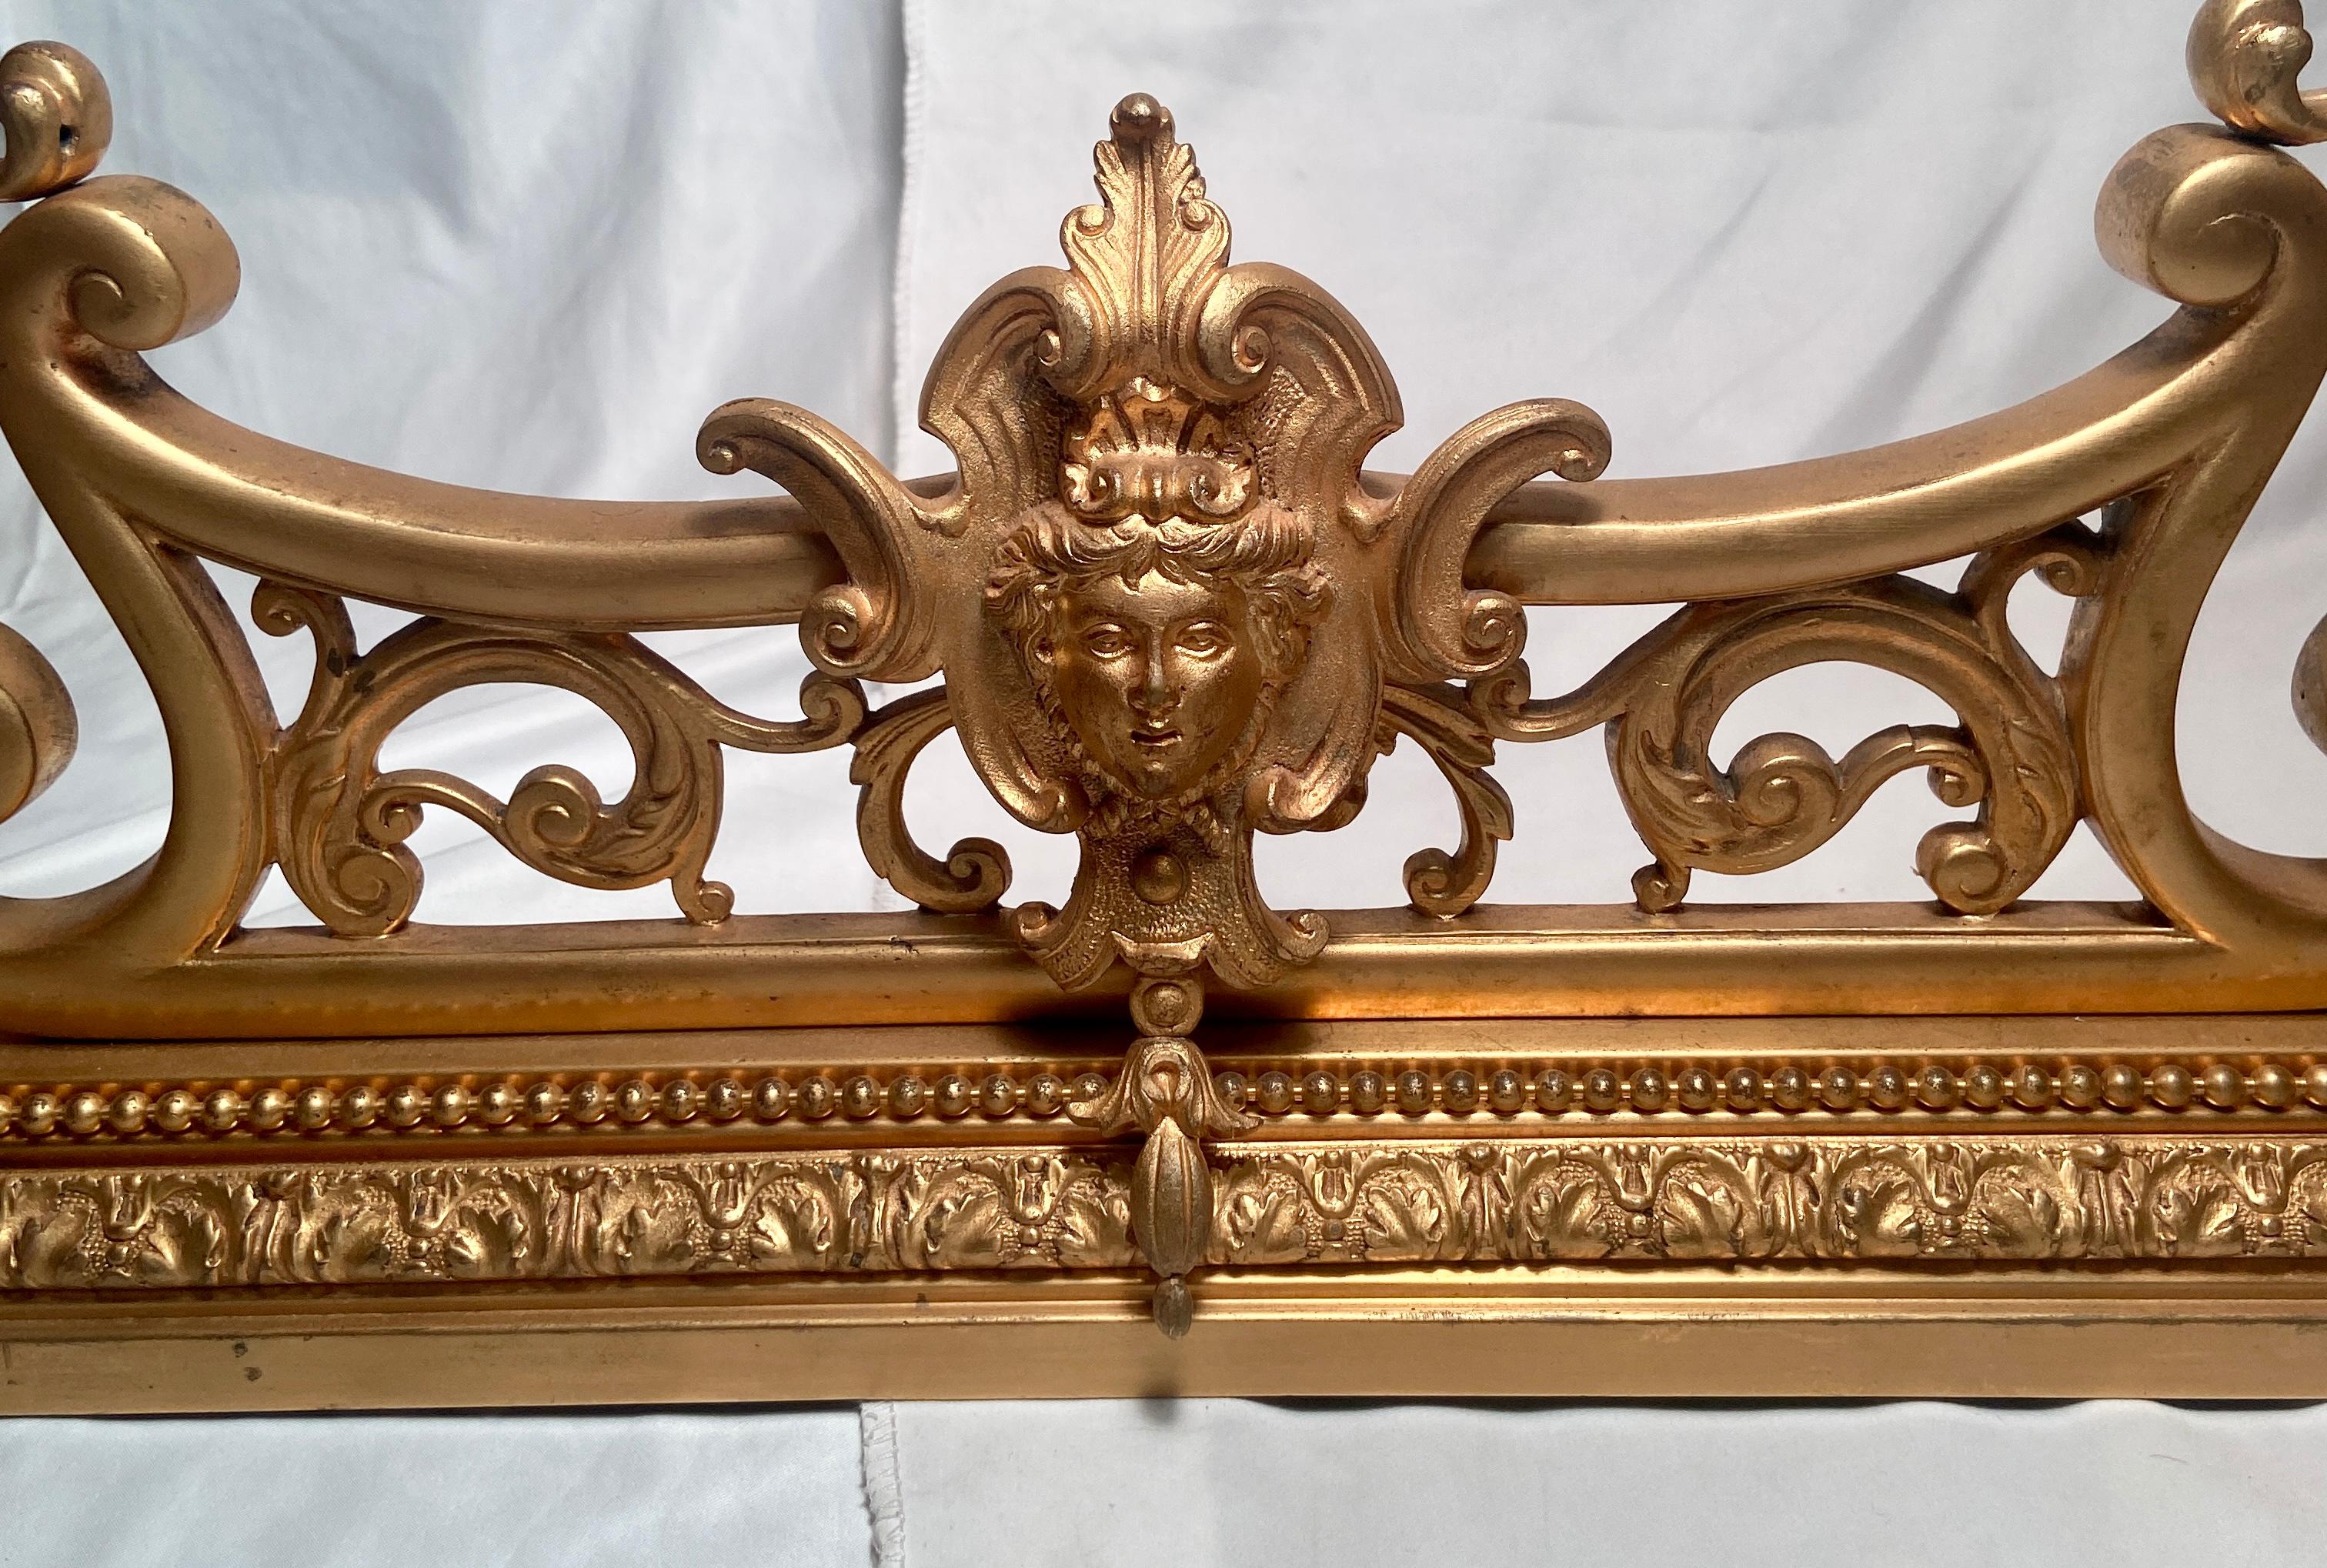 Exquisite antique French Louis XVI style Ormolu fireplace fender. Beautiful ormolu with intricate detail work.